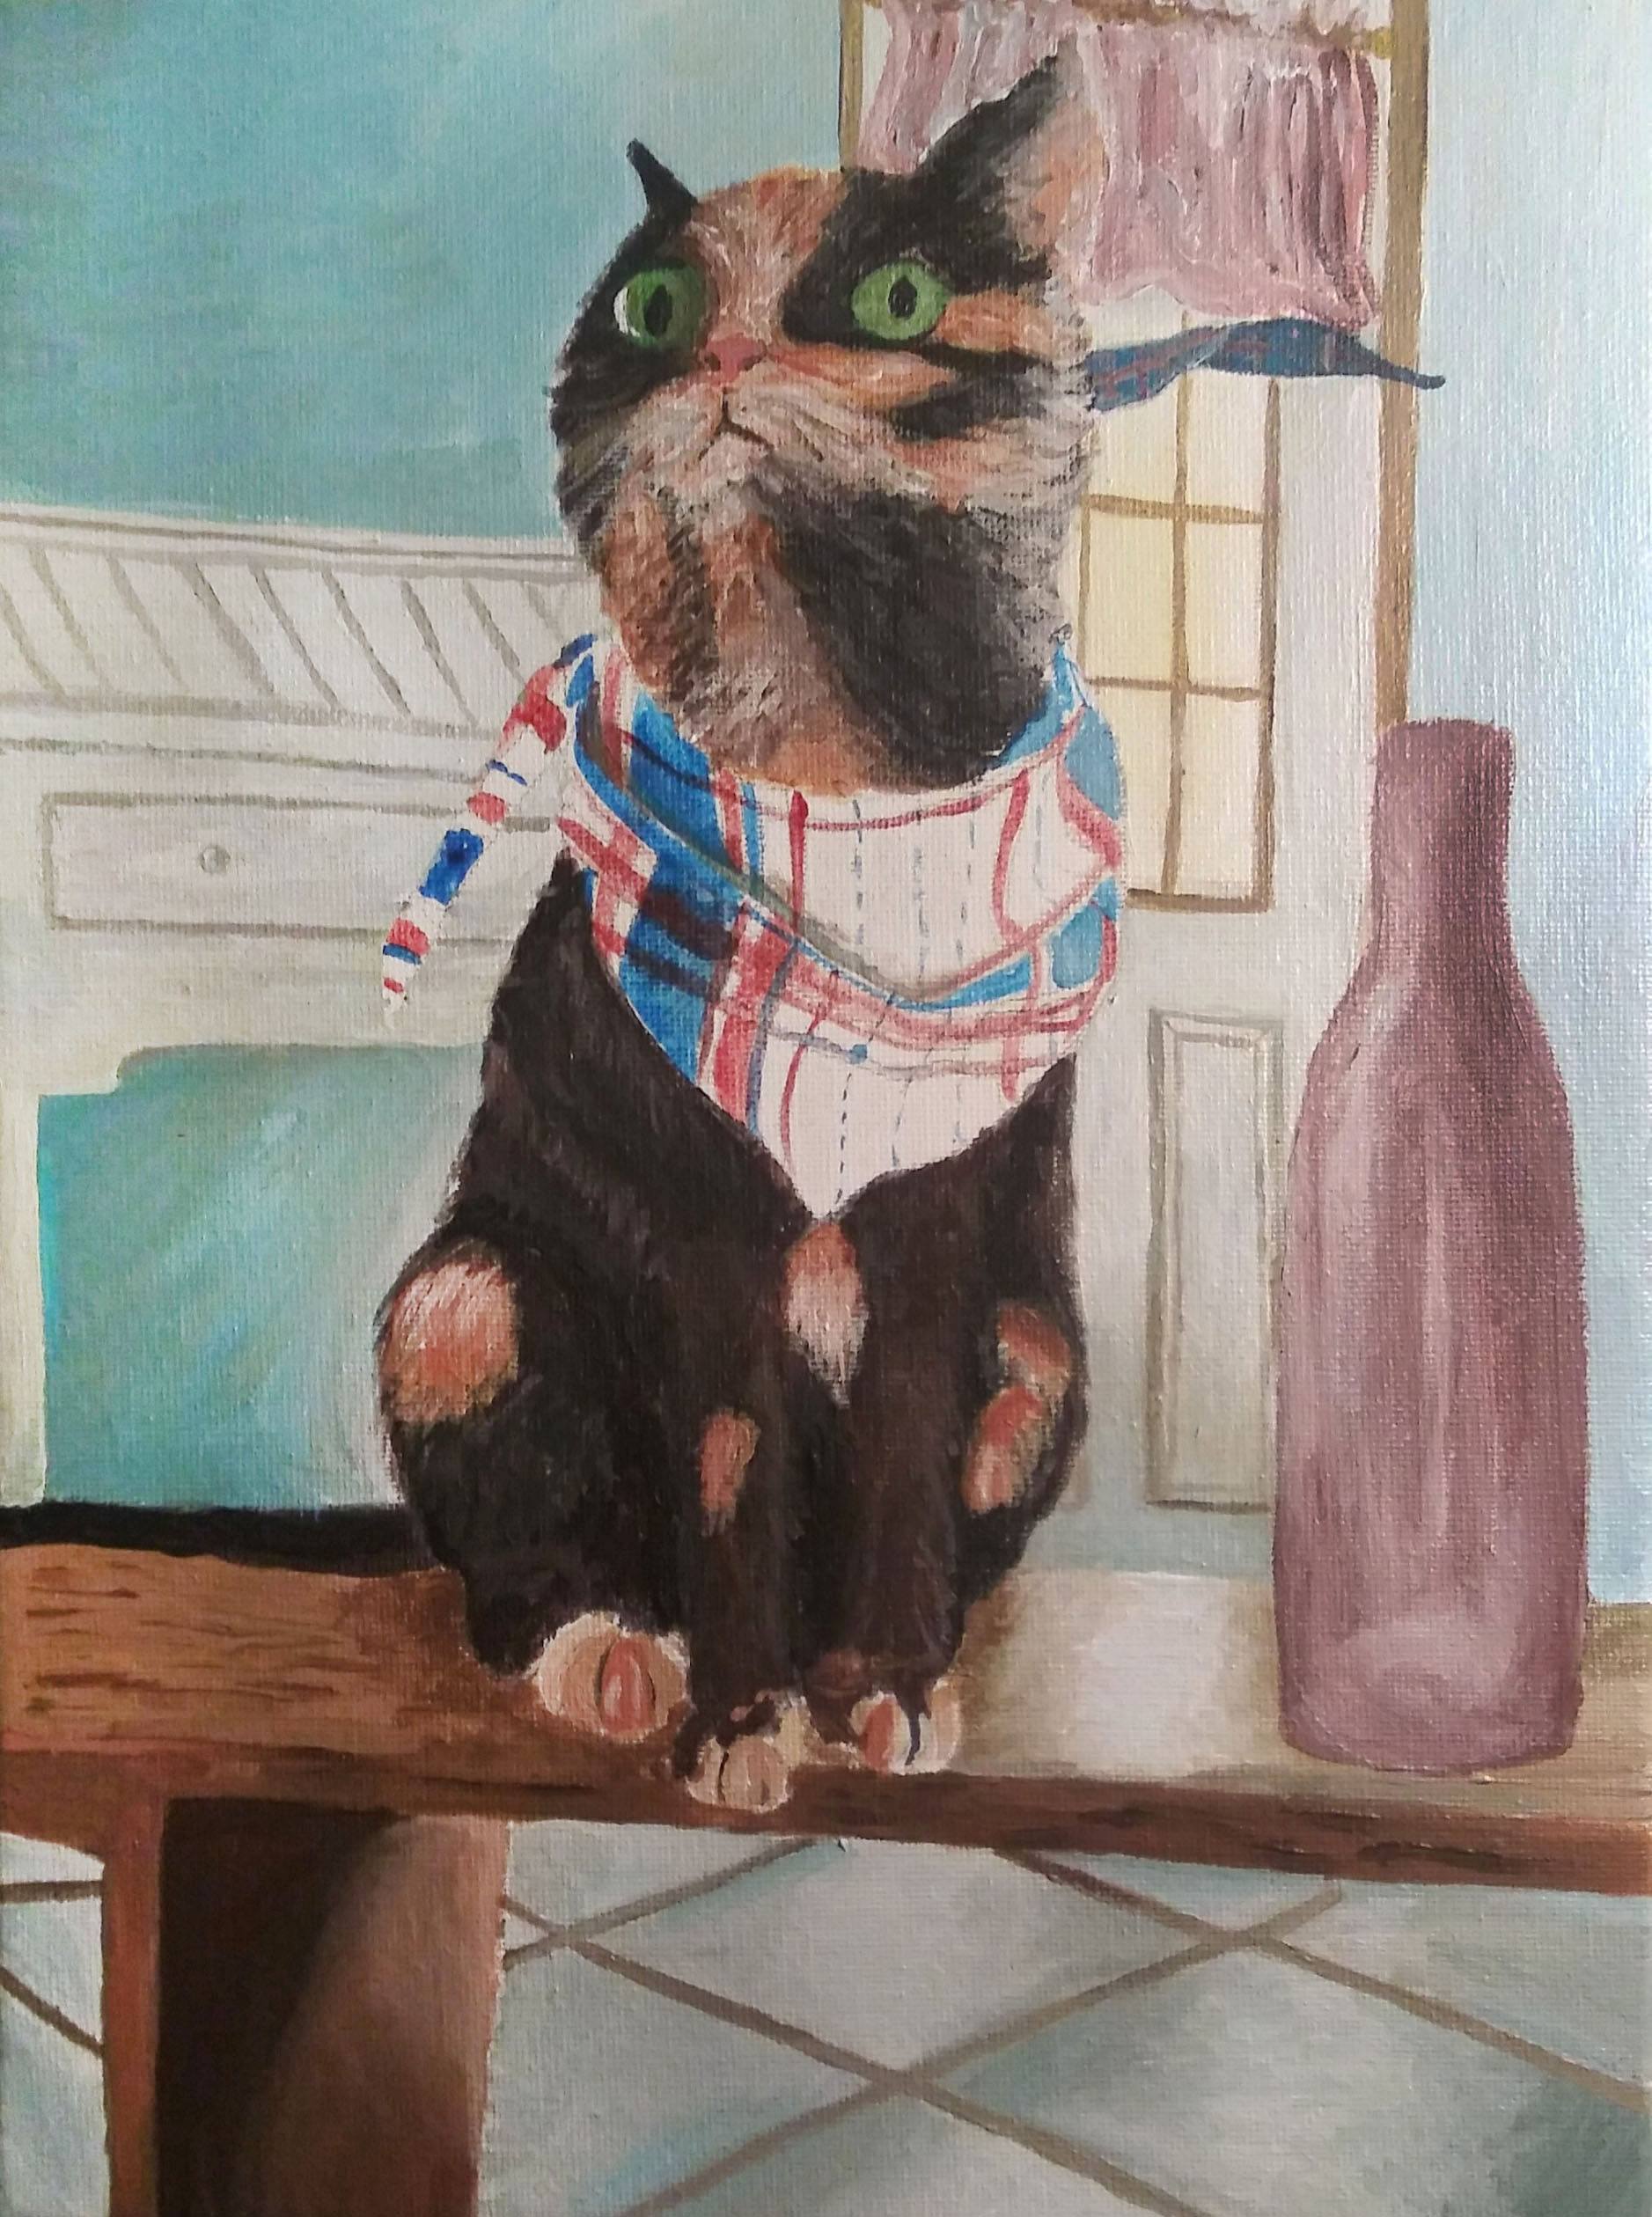 A painting of a cat on a bench